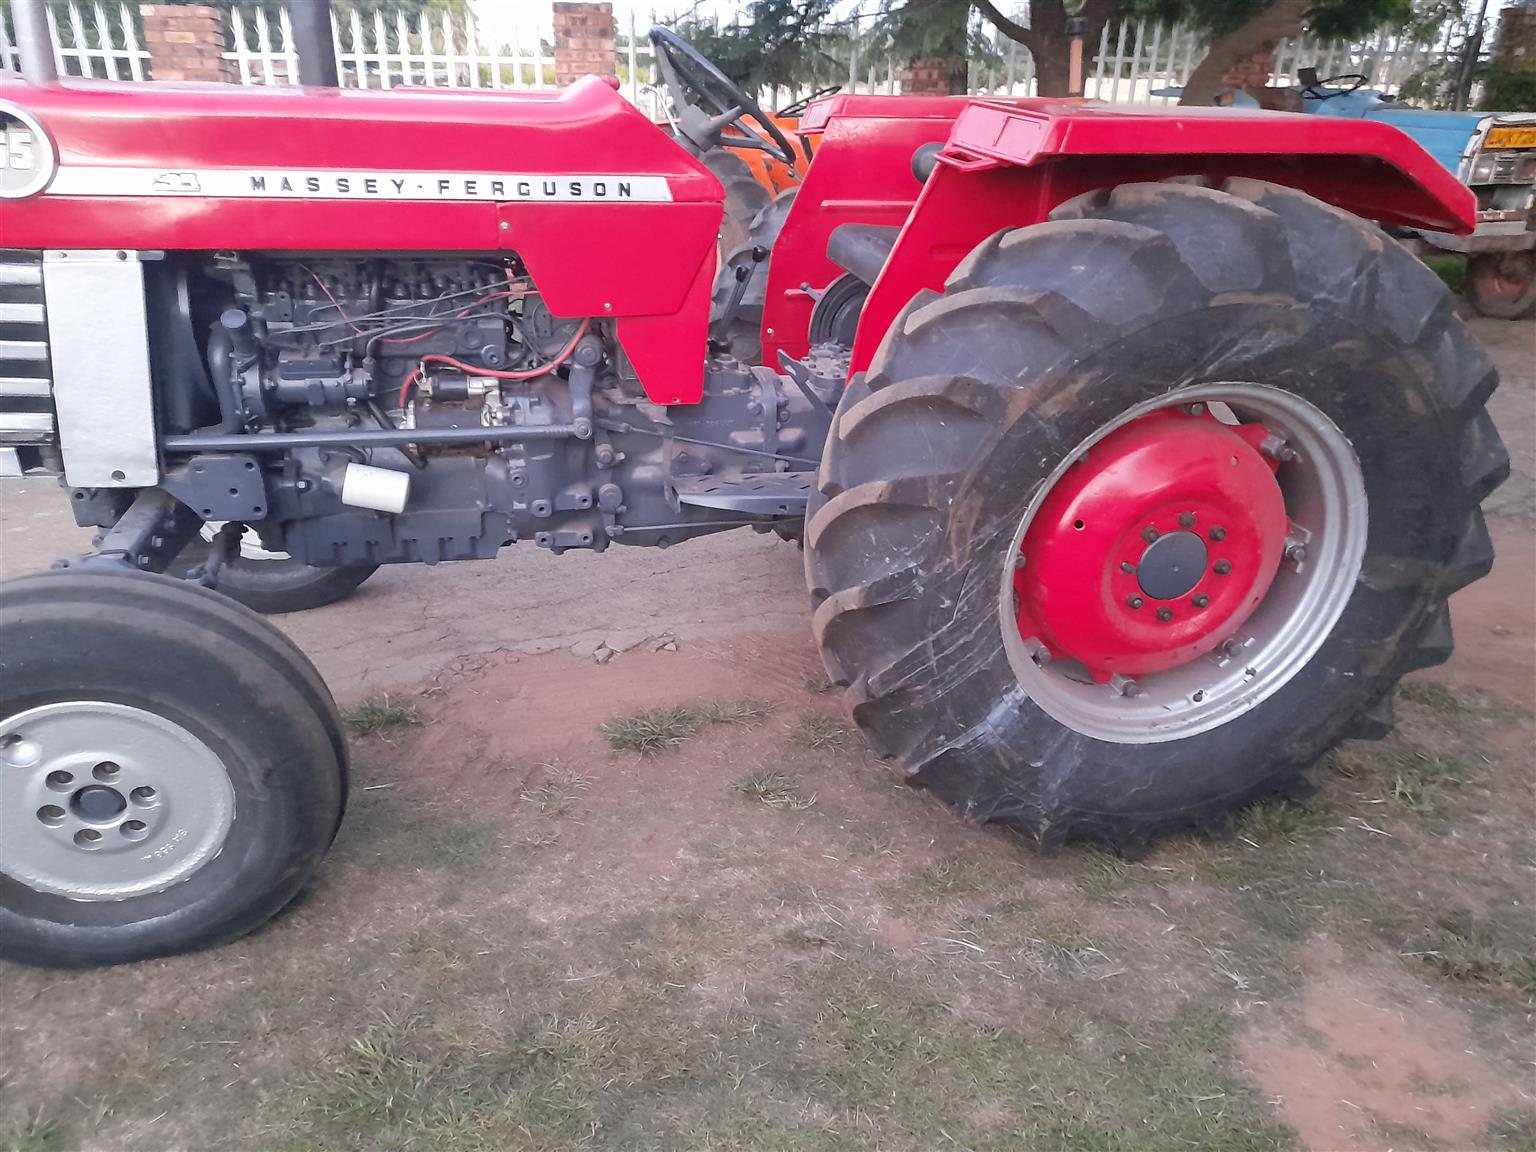 Massey Ferguson 165 Tractor In Good Condition Junk Mail